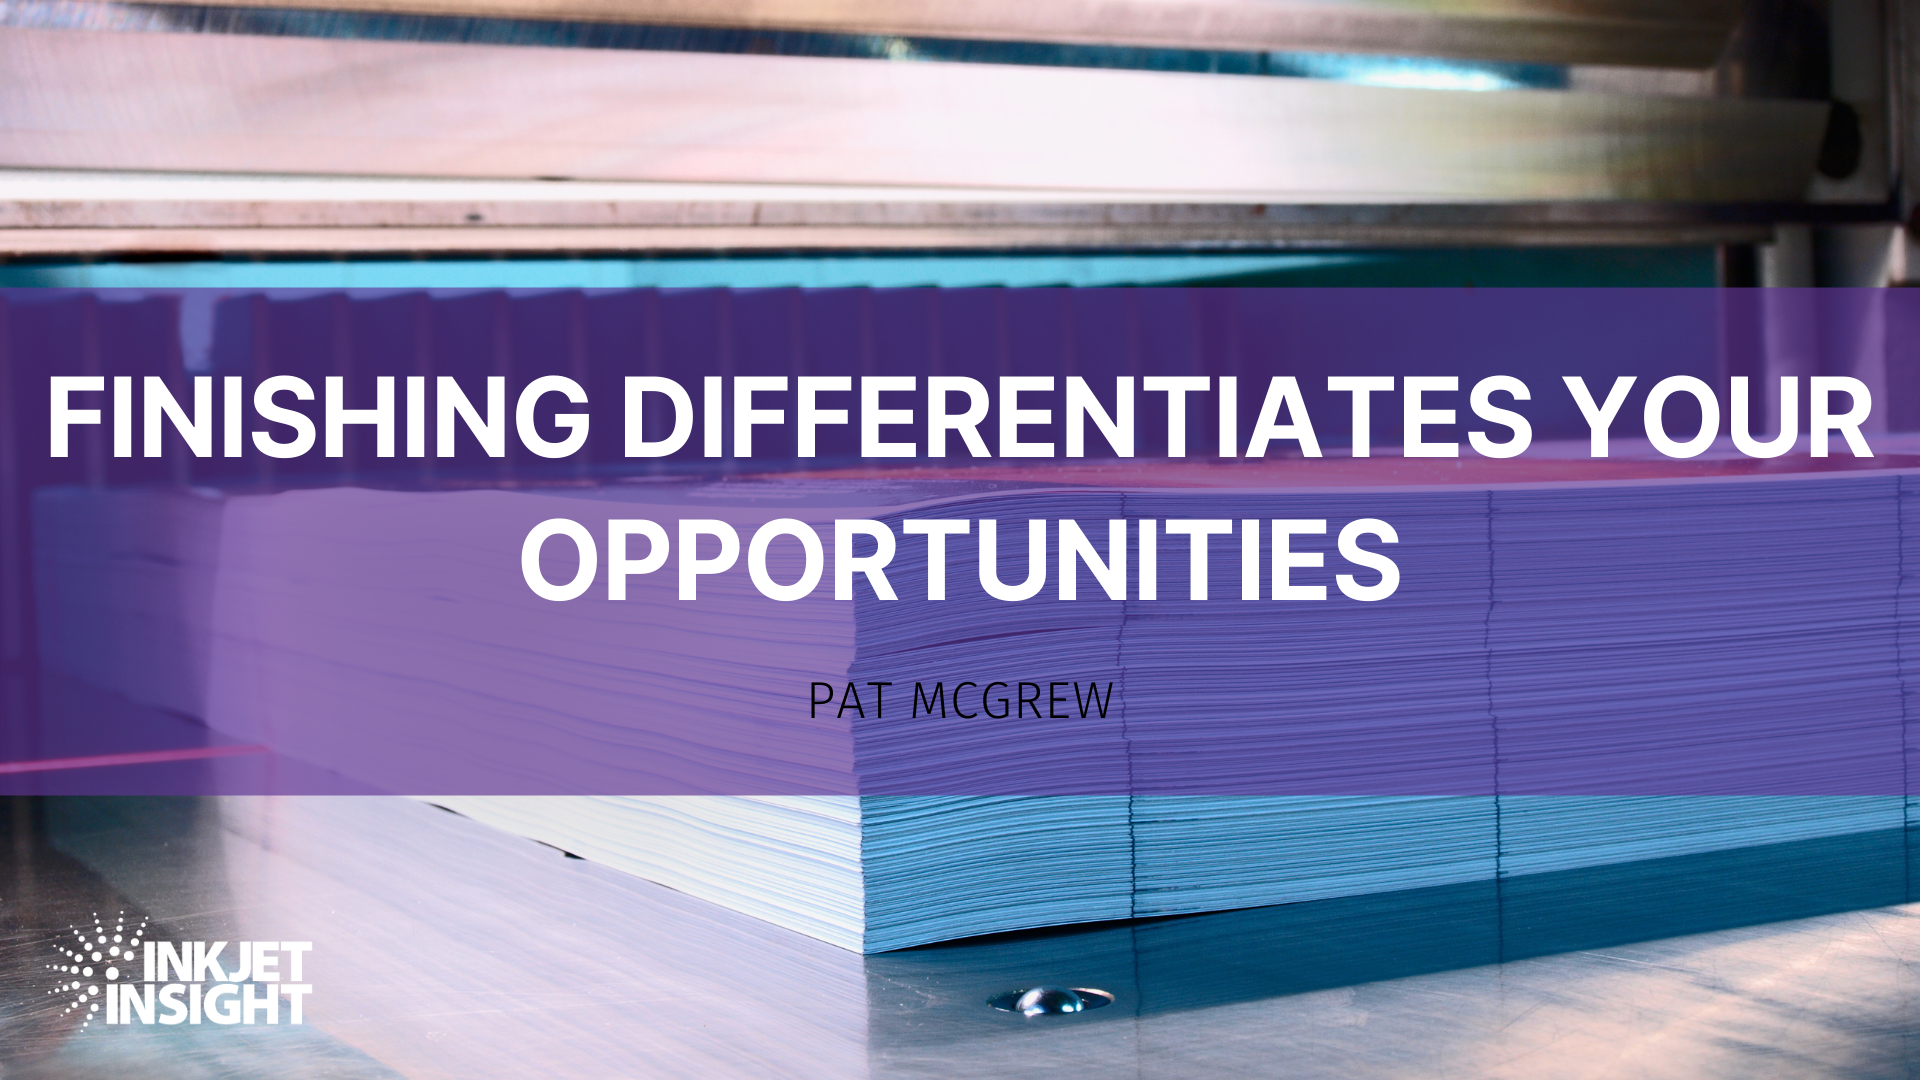 Featured image for “Finishing Differentiates Your Opportunities”